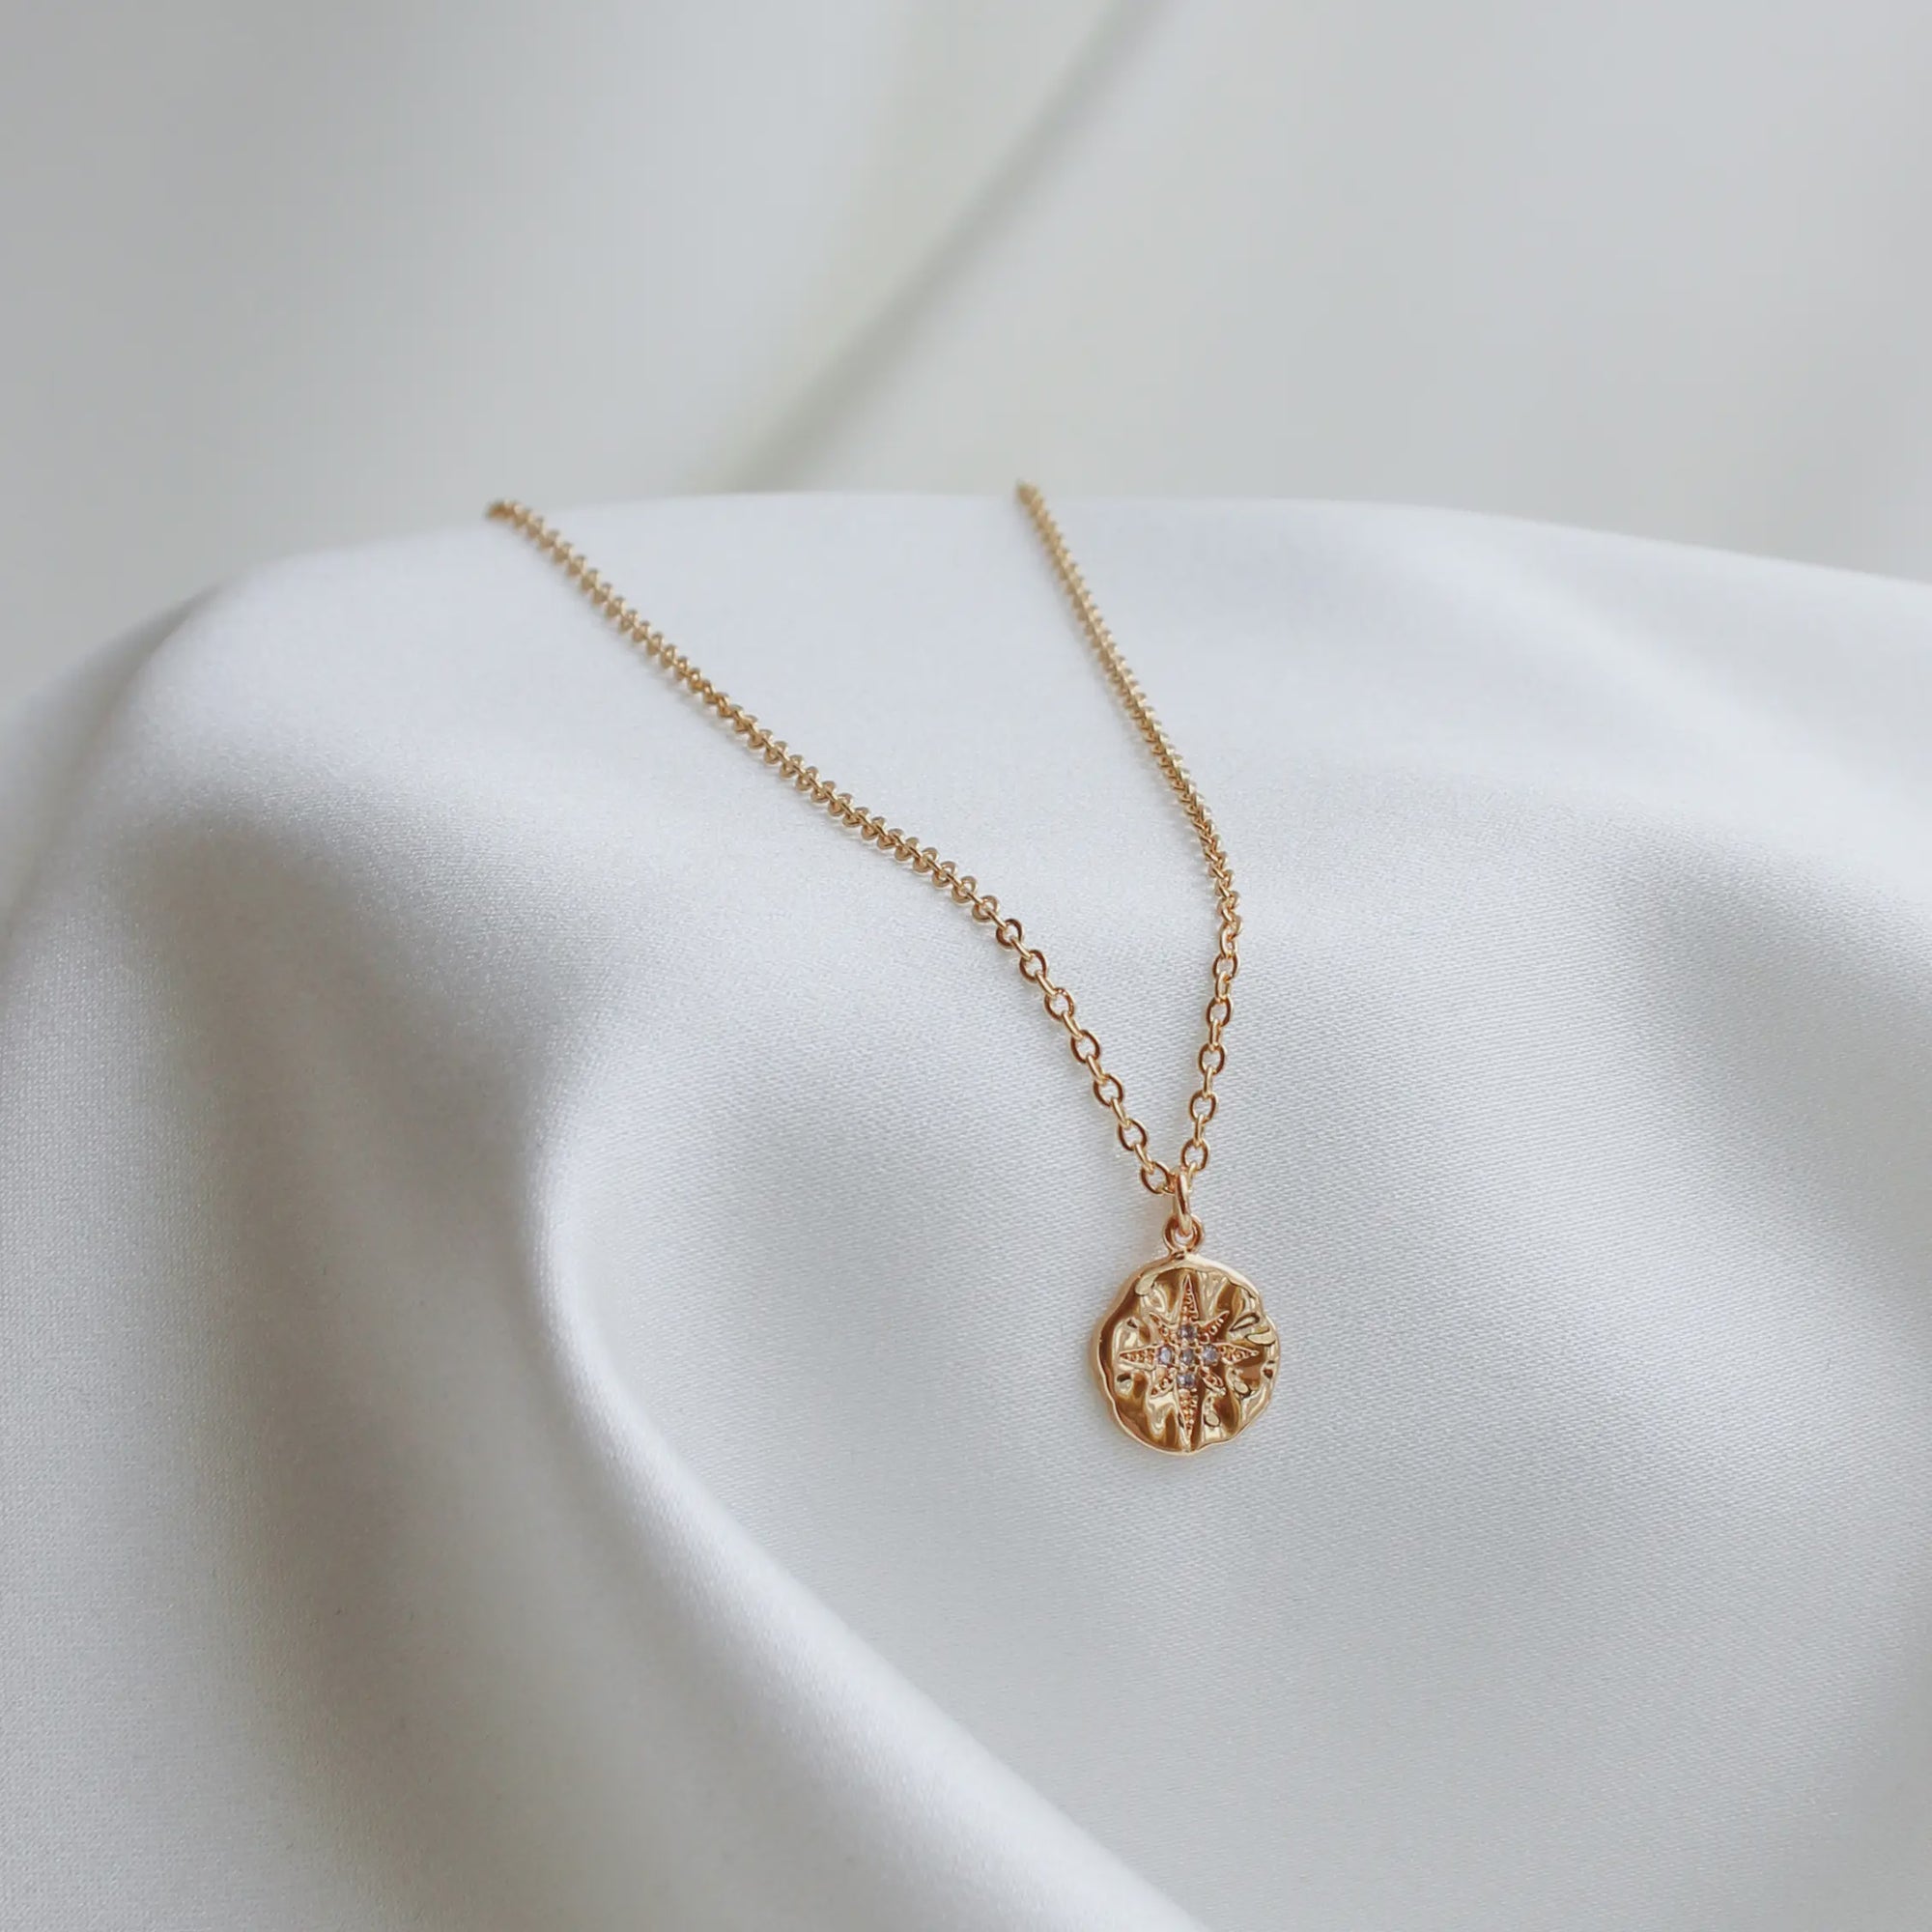 The Crystal Star Medallion Necklace by  MASHALLAH